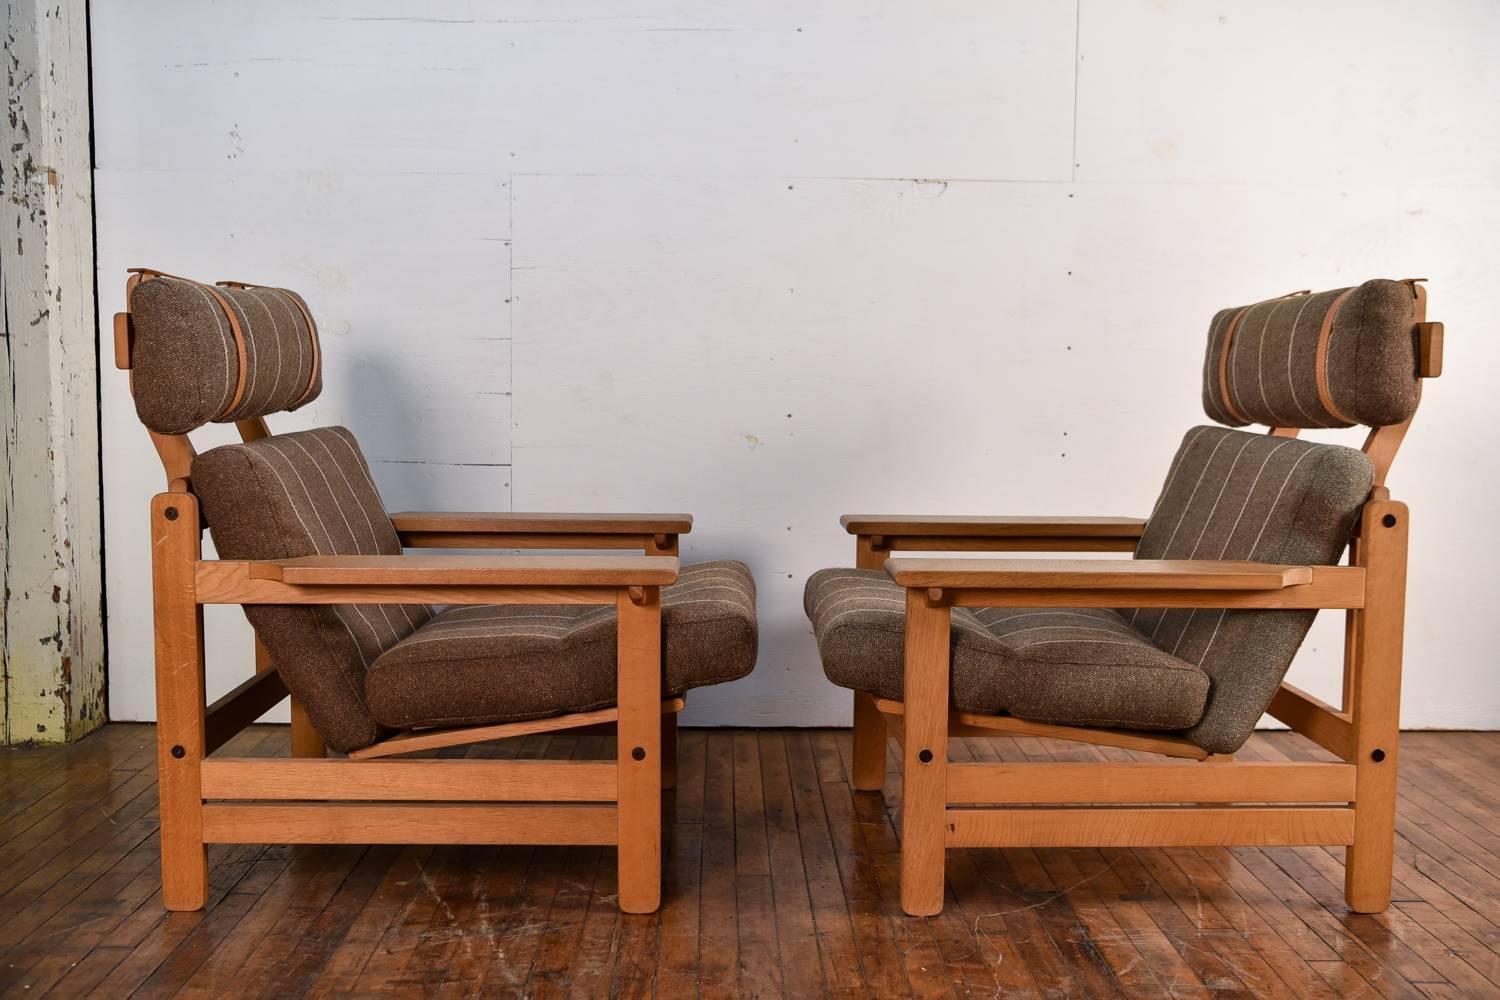 Mid-Century Modern Pair of Danish Mid-Century Lounge Chairs by Aksel Dahl for K.P. Møbler, 1972